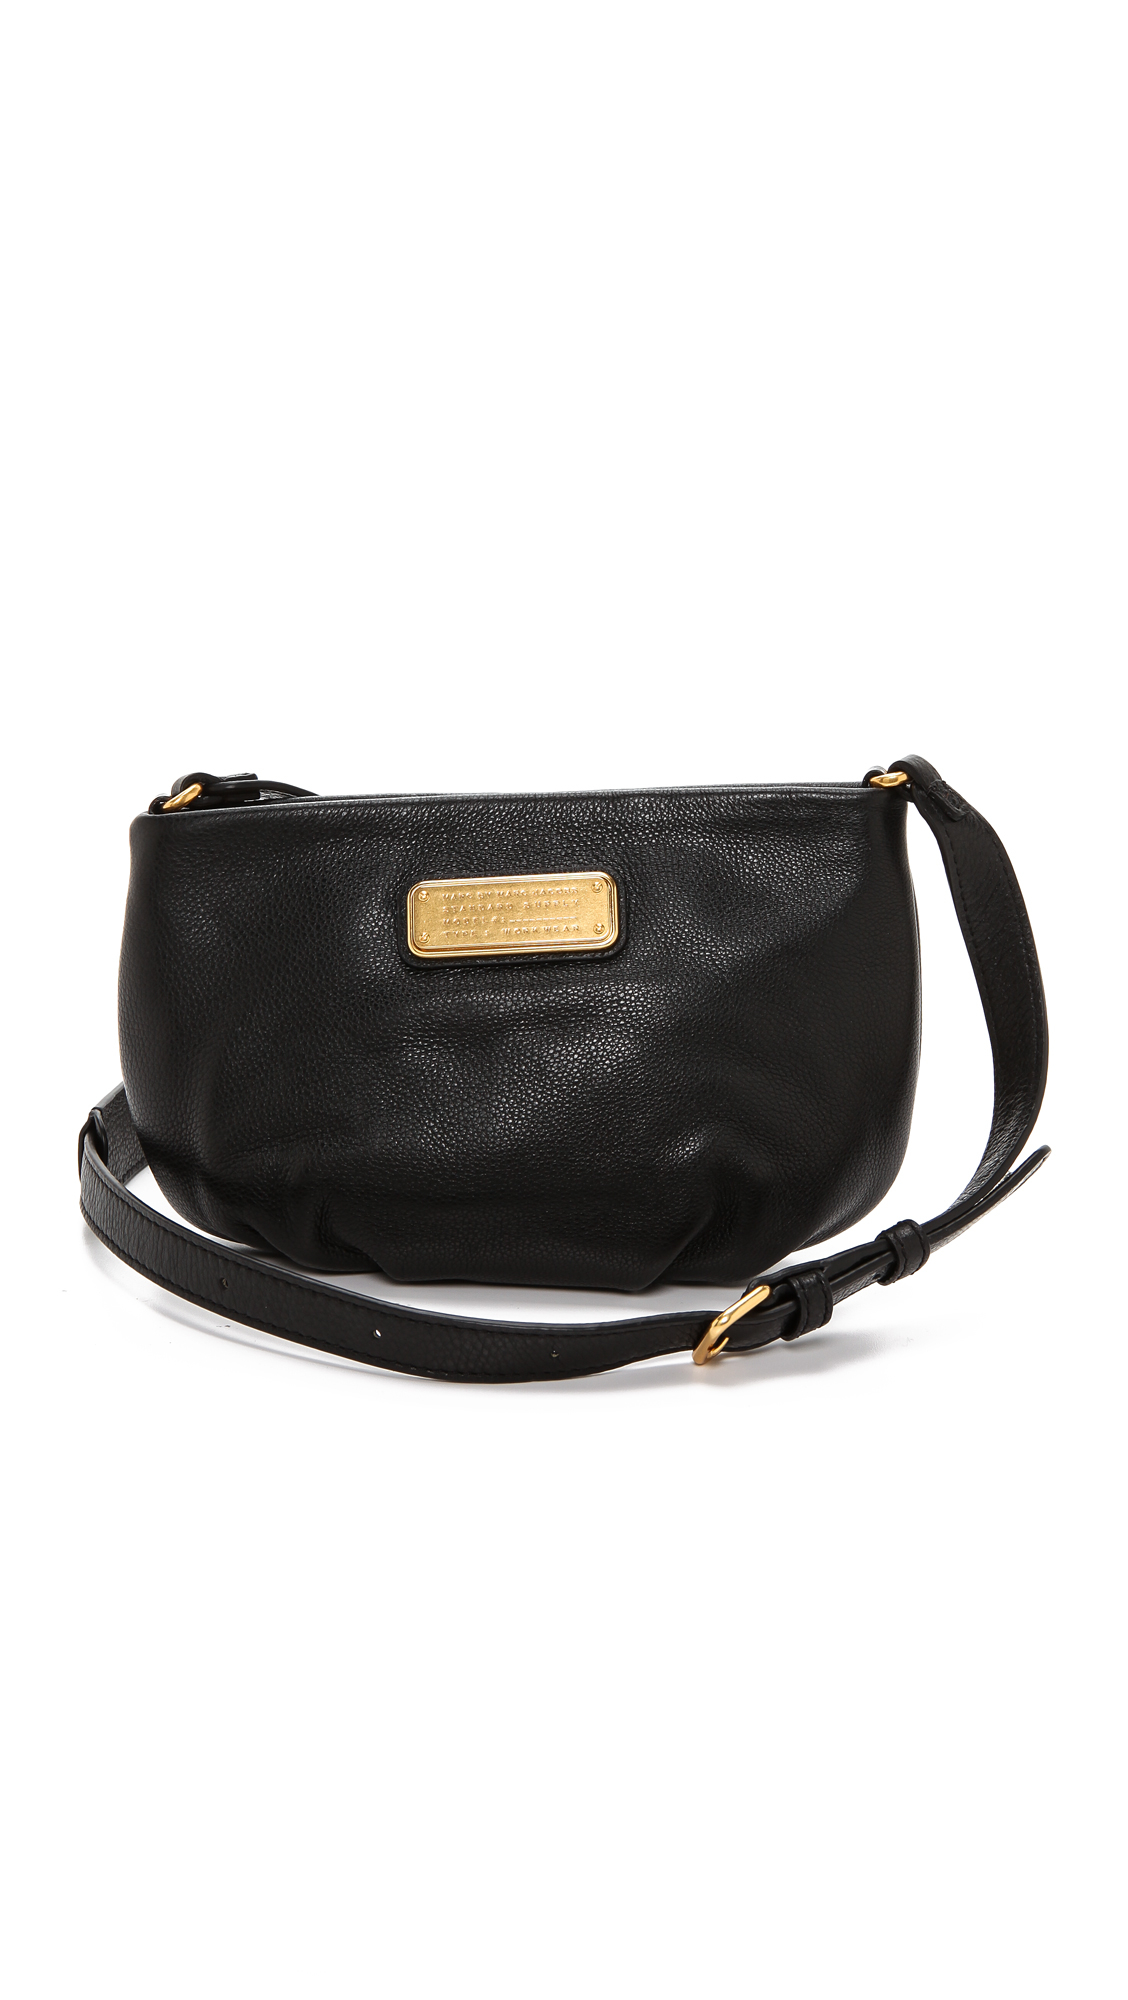 By Marc Jacobs New Q Percy Bag in